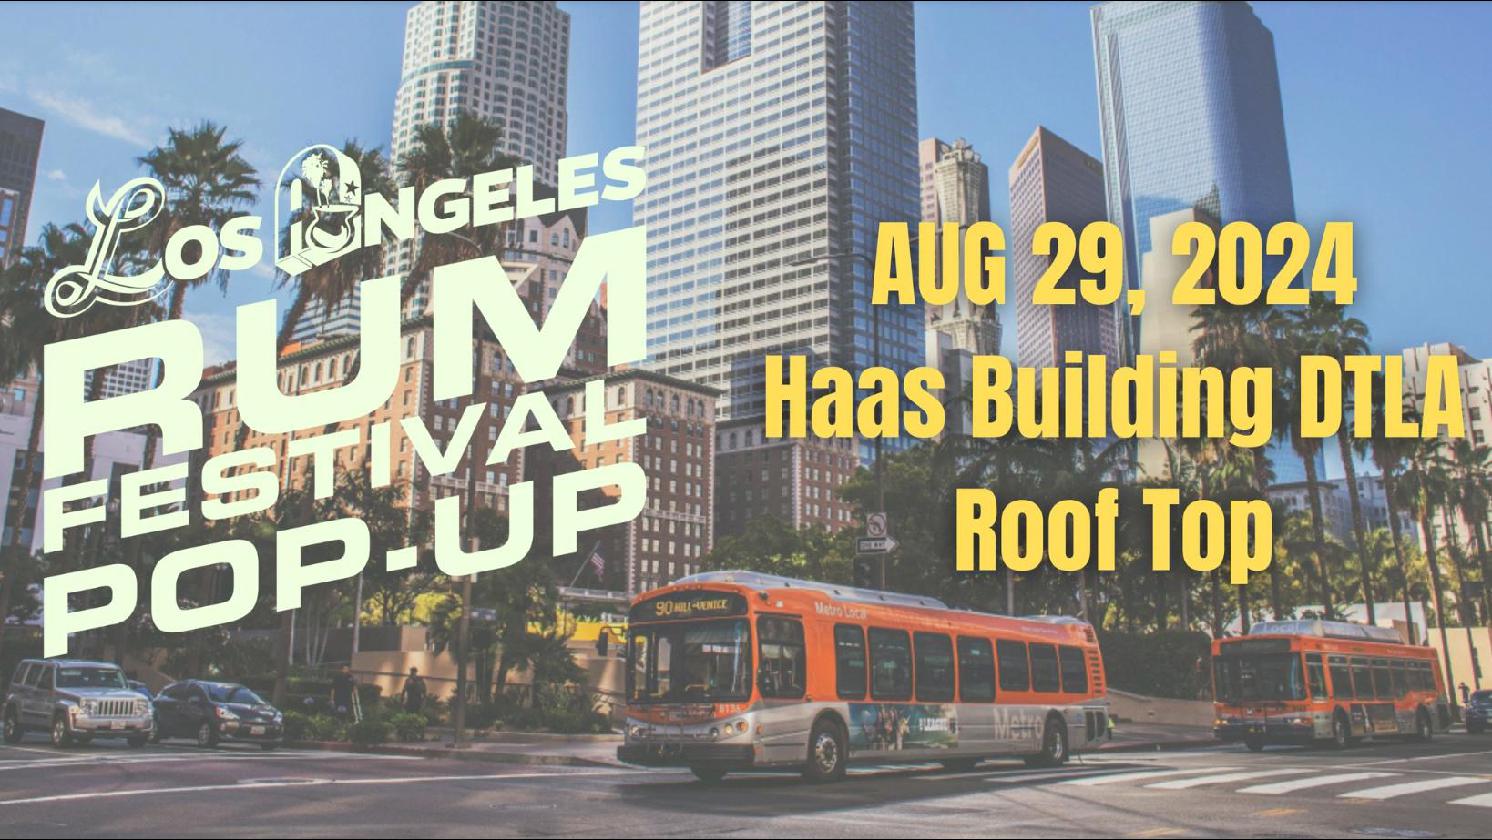 Los Angeles Rum Fest 2024 (PopUp Roof Top Edition) 29 AUG 2024